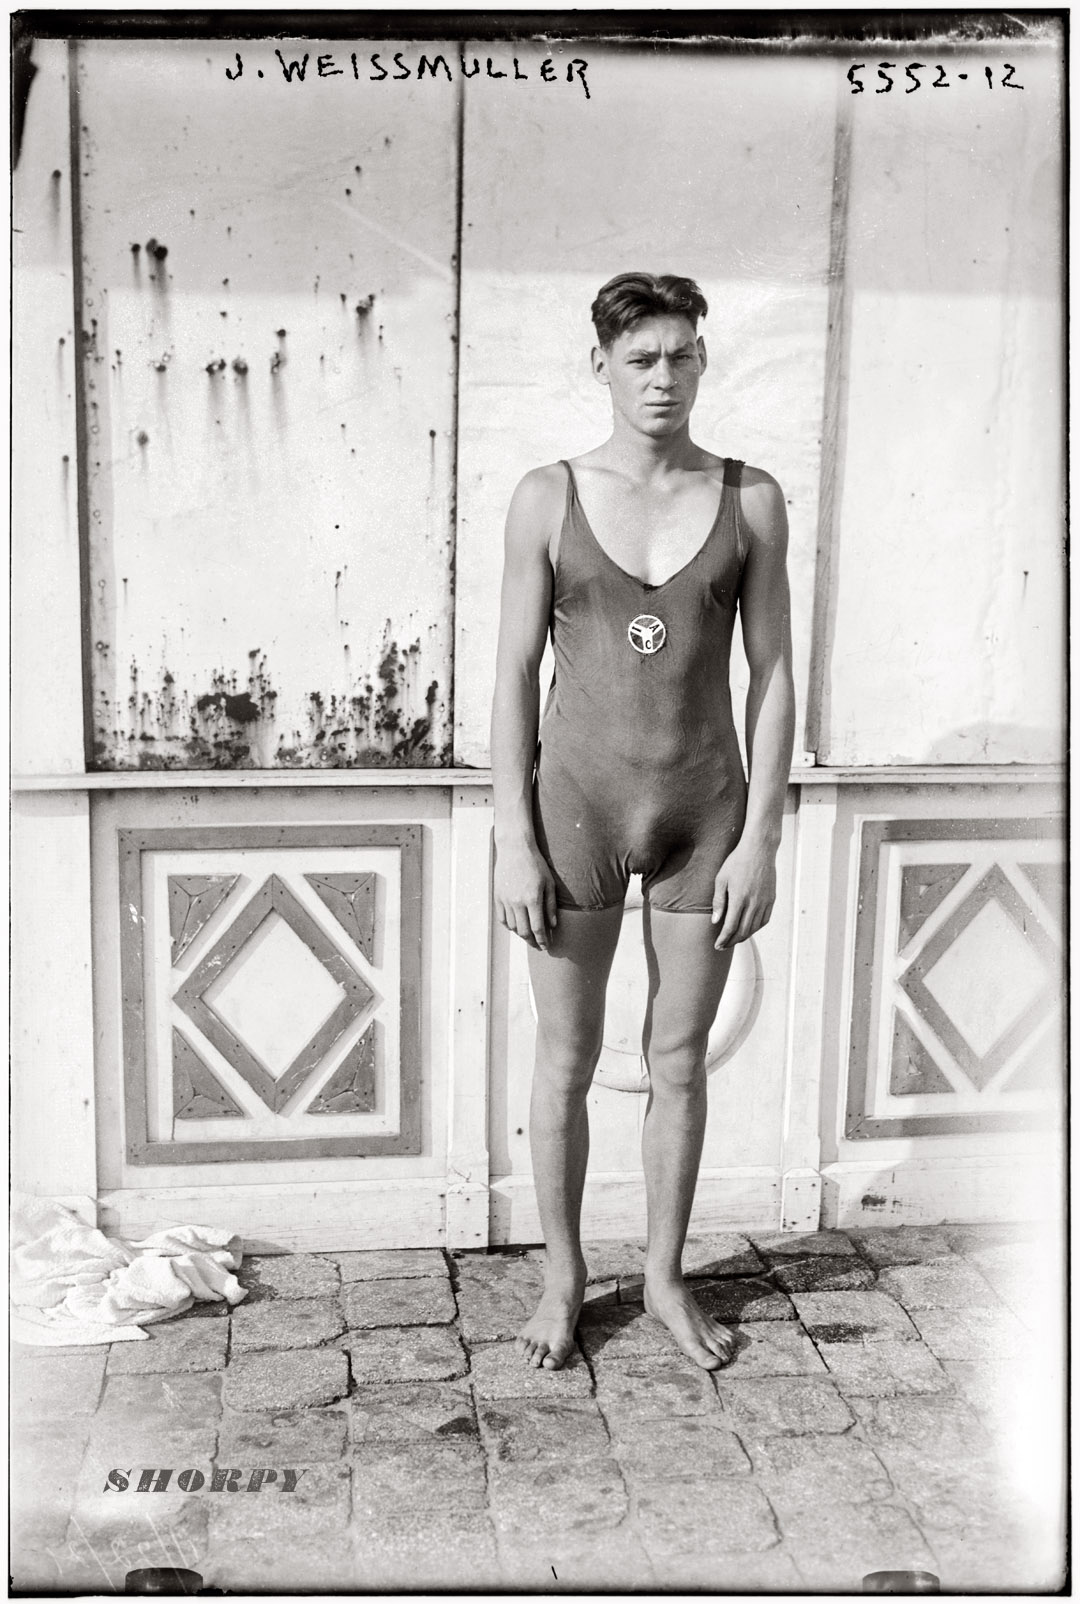 Johnny Weissmuller in an Illinois Athletic Club swimsuit circa 1922, prior to winning five Olympic gold medals in 1924 and 1928. Before becoming Tarzan and signing a movie contract with MGM in 1932, Weissmuller was a spokesmodel for BVD swimwear. George Grantham Bain Collection. View full size.